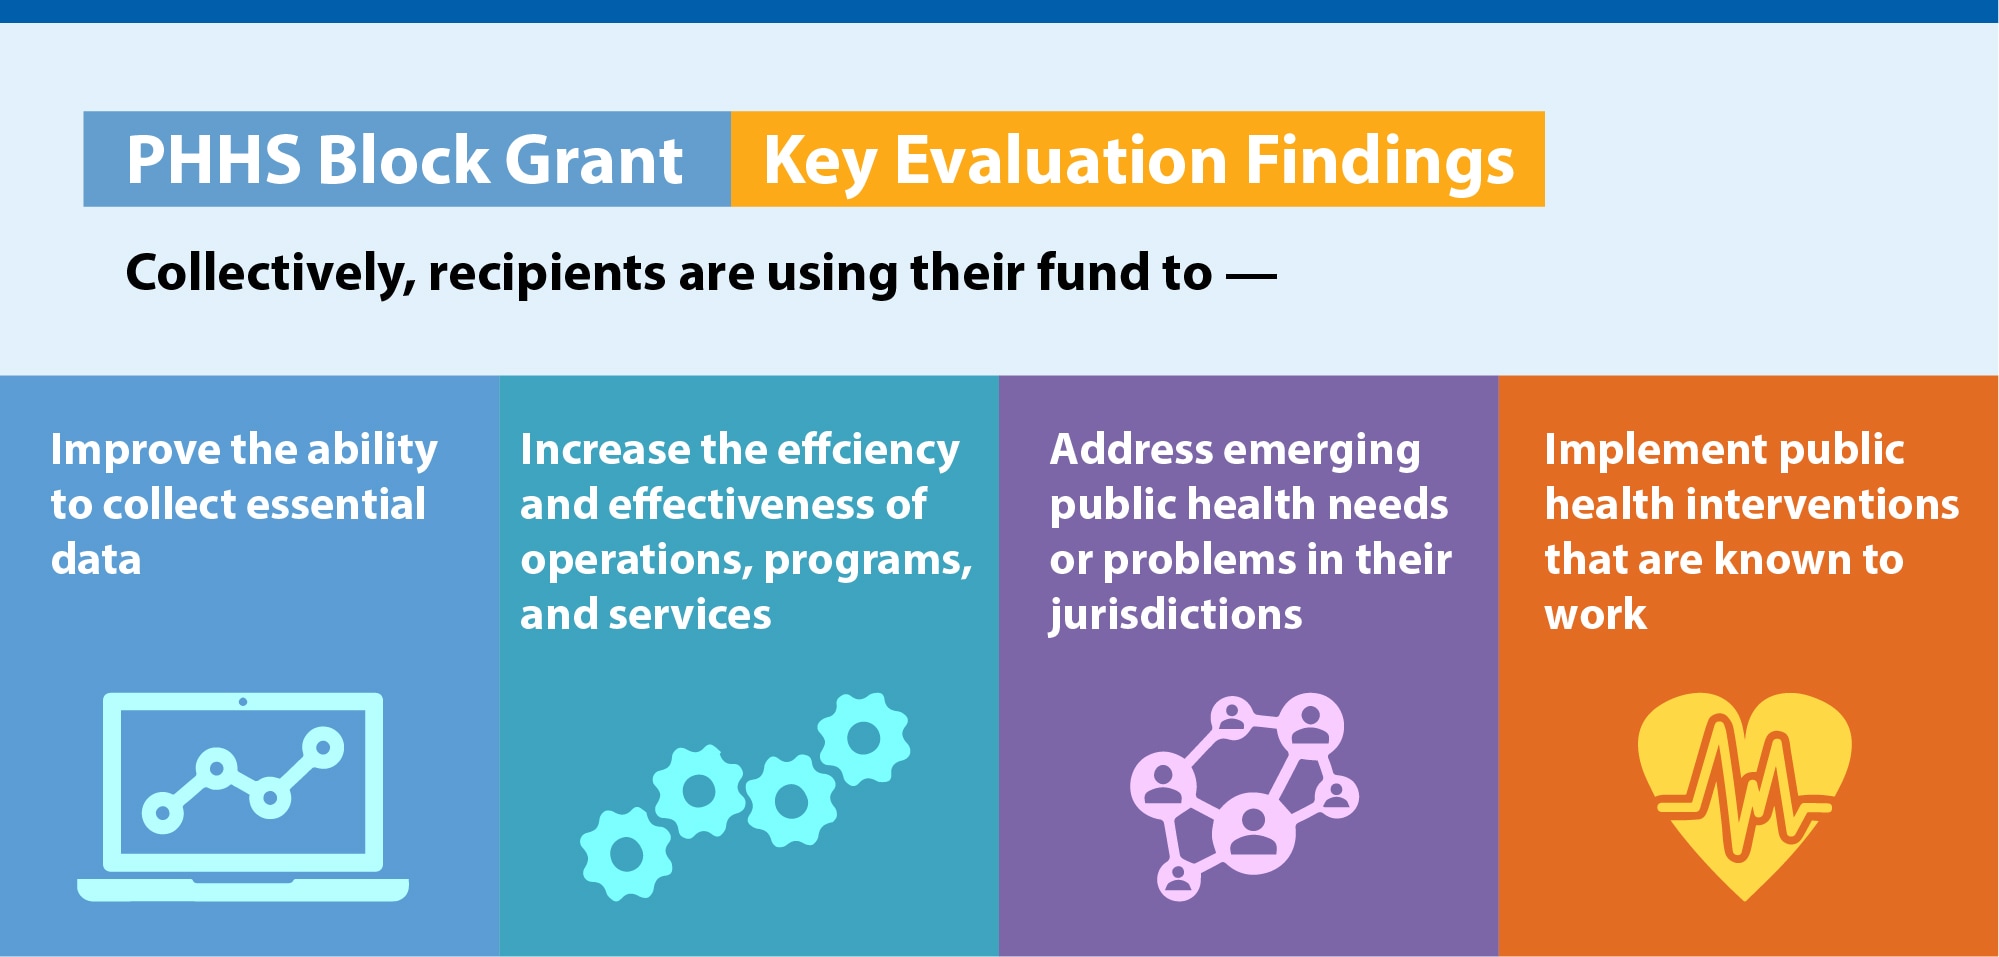 PHHS Block Grant Key Evaluation Findings Graphic